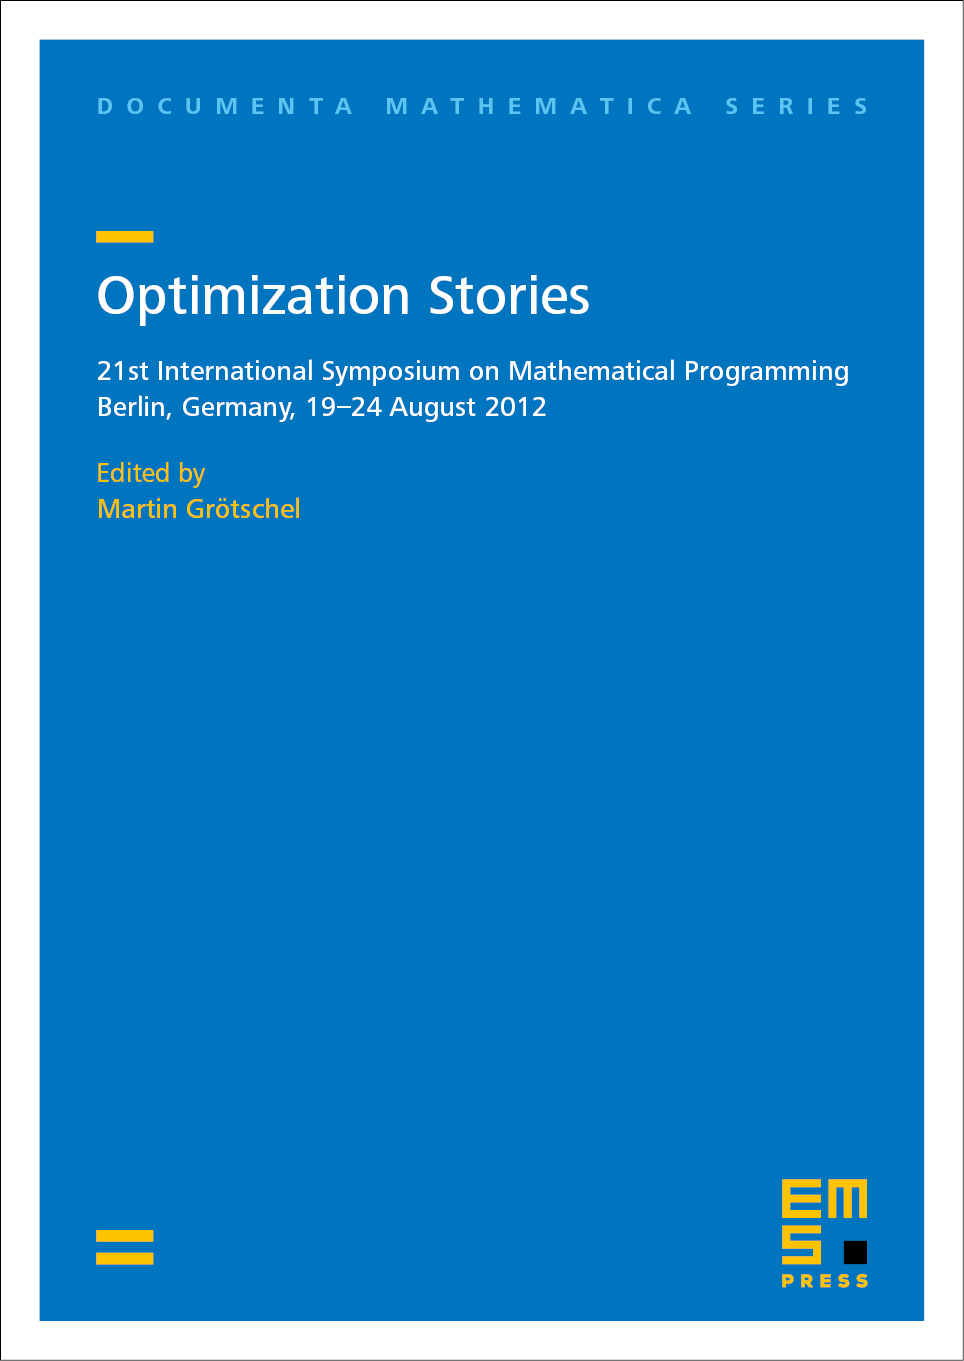 Stories about the old masters of optimization cover